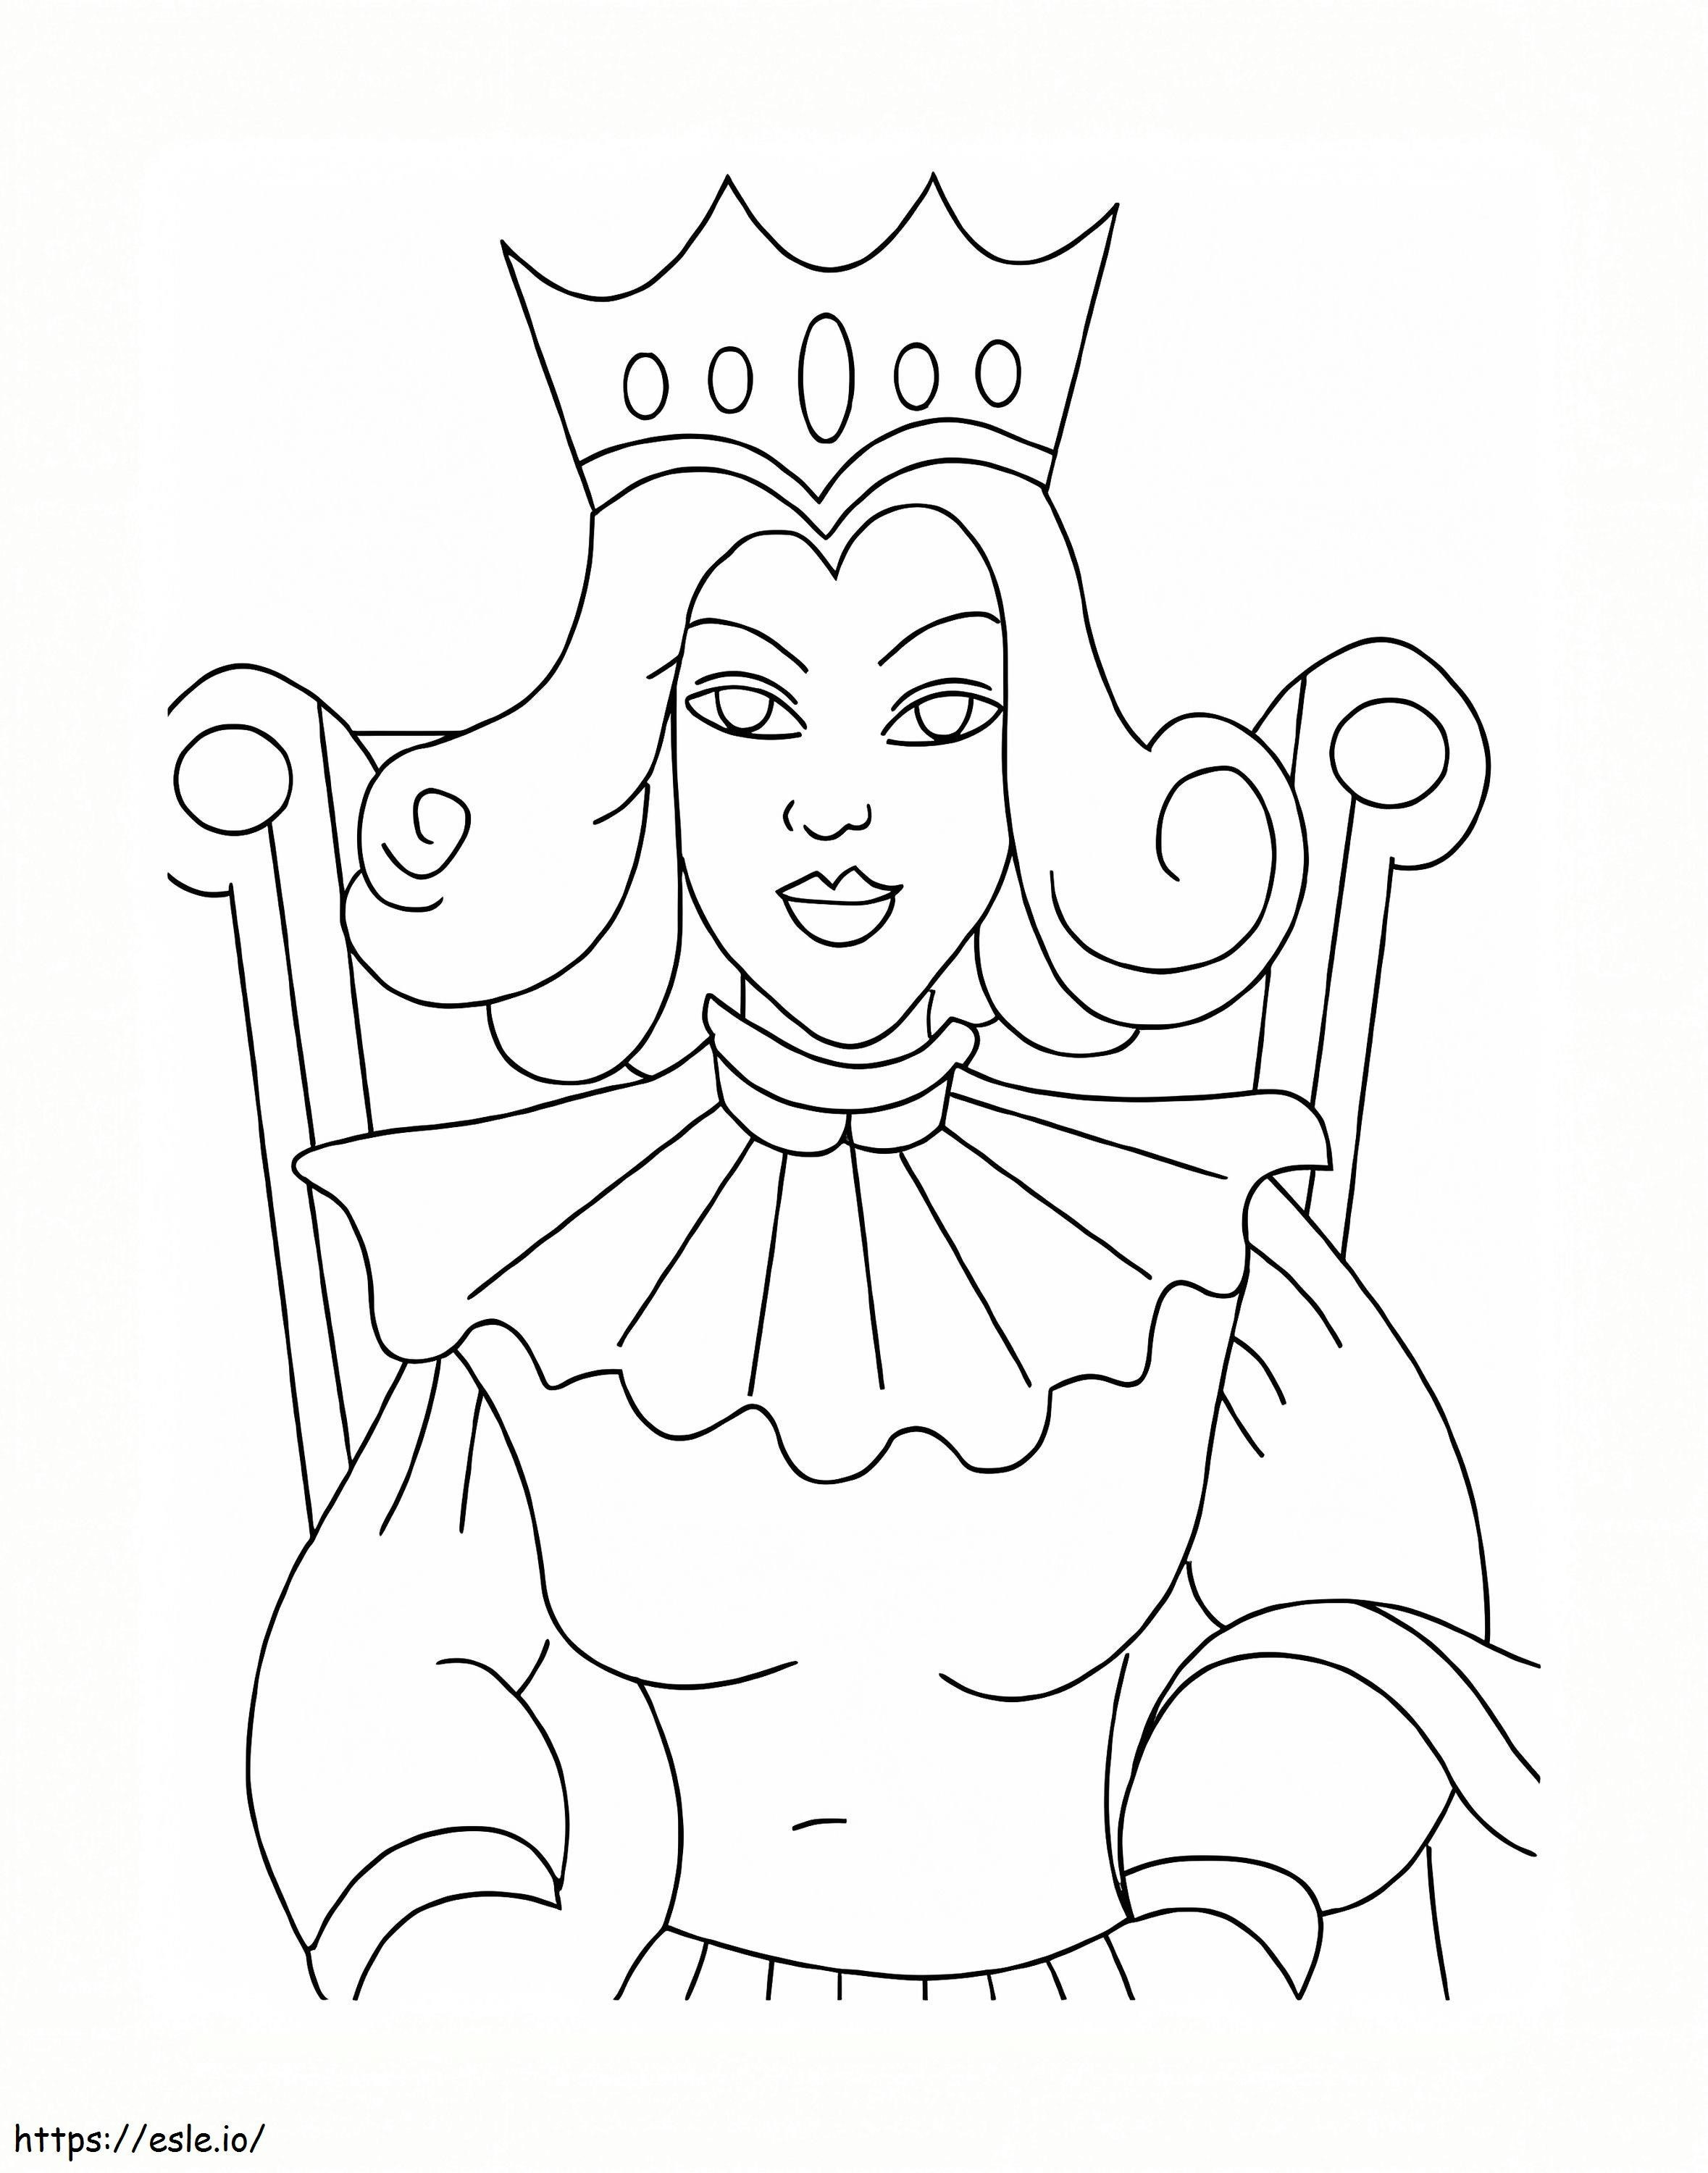 Queen On Chair coloring page